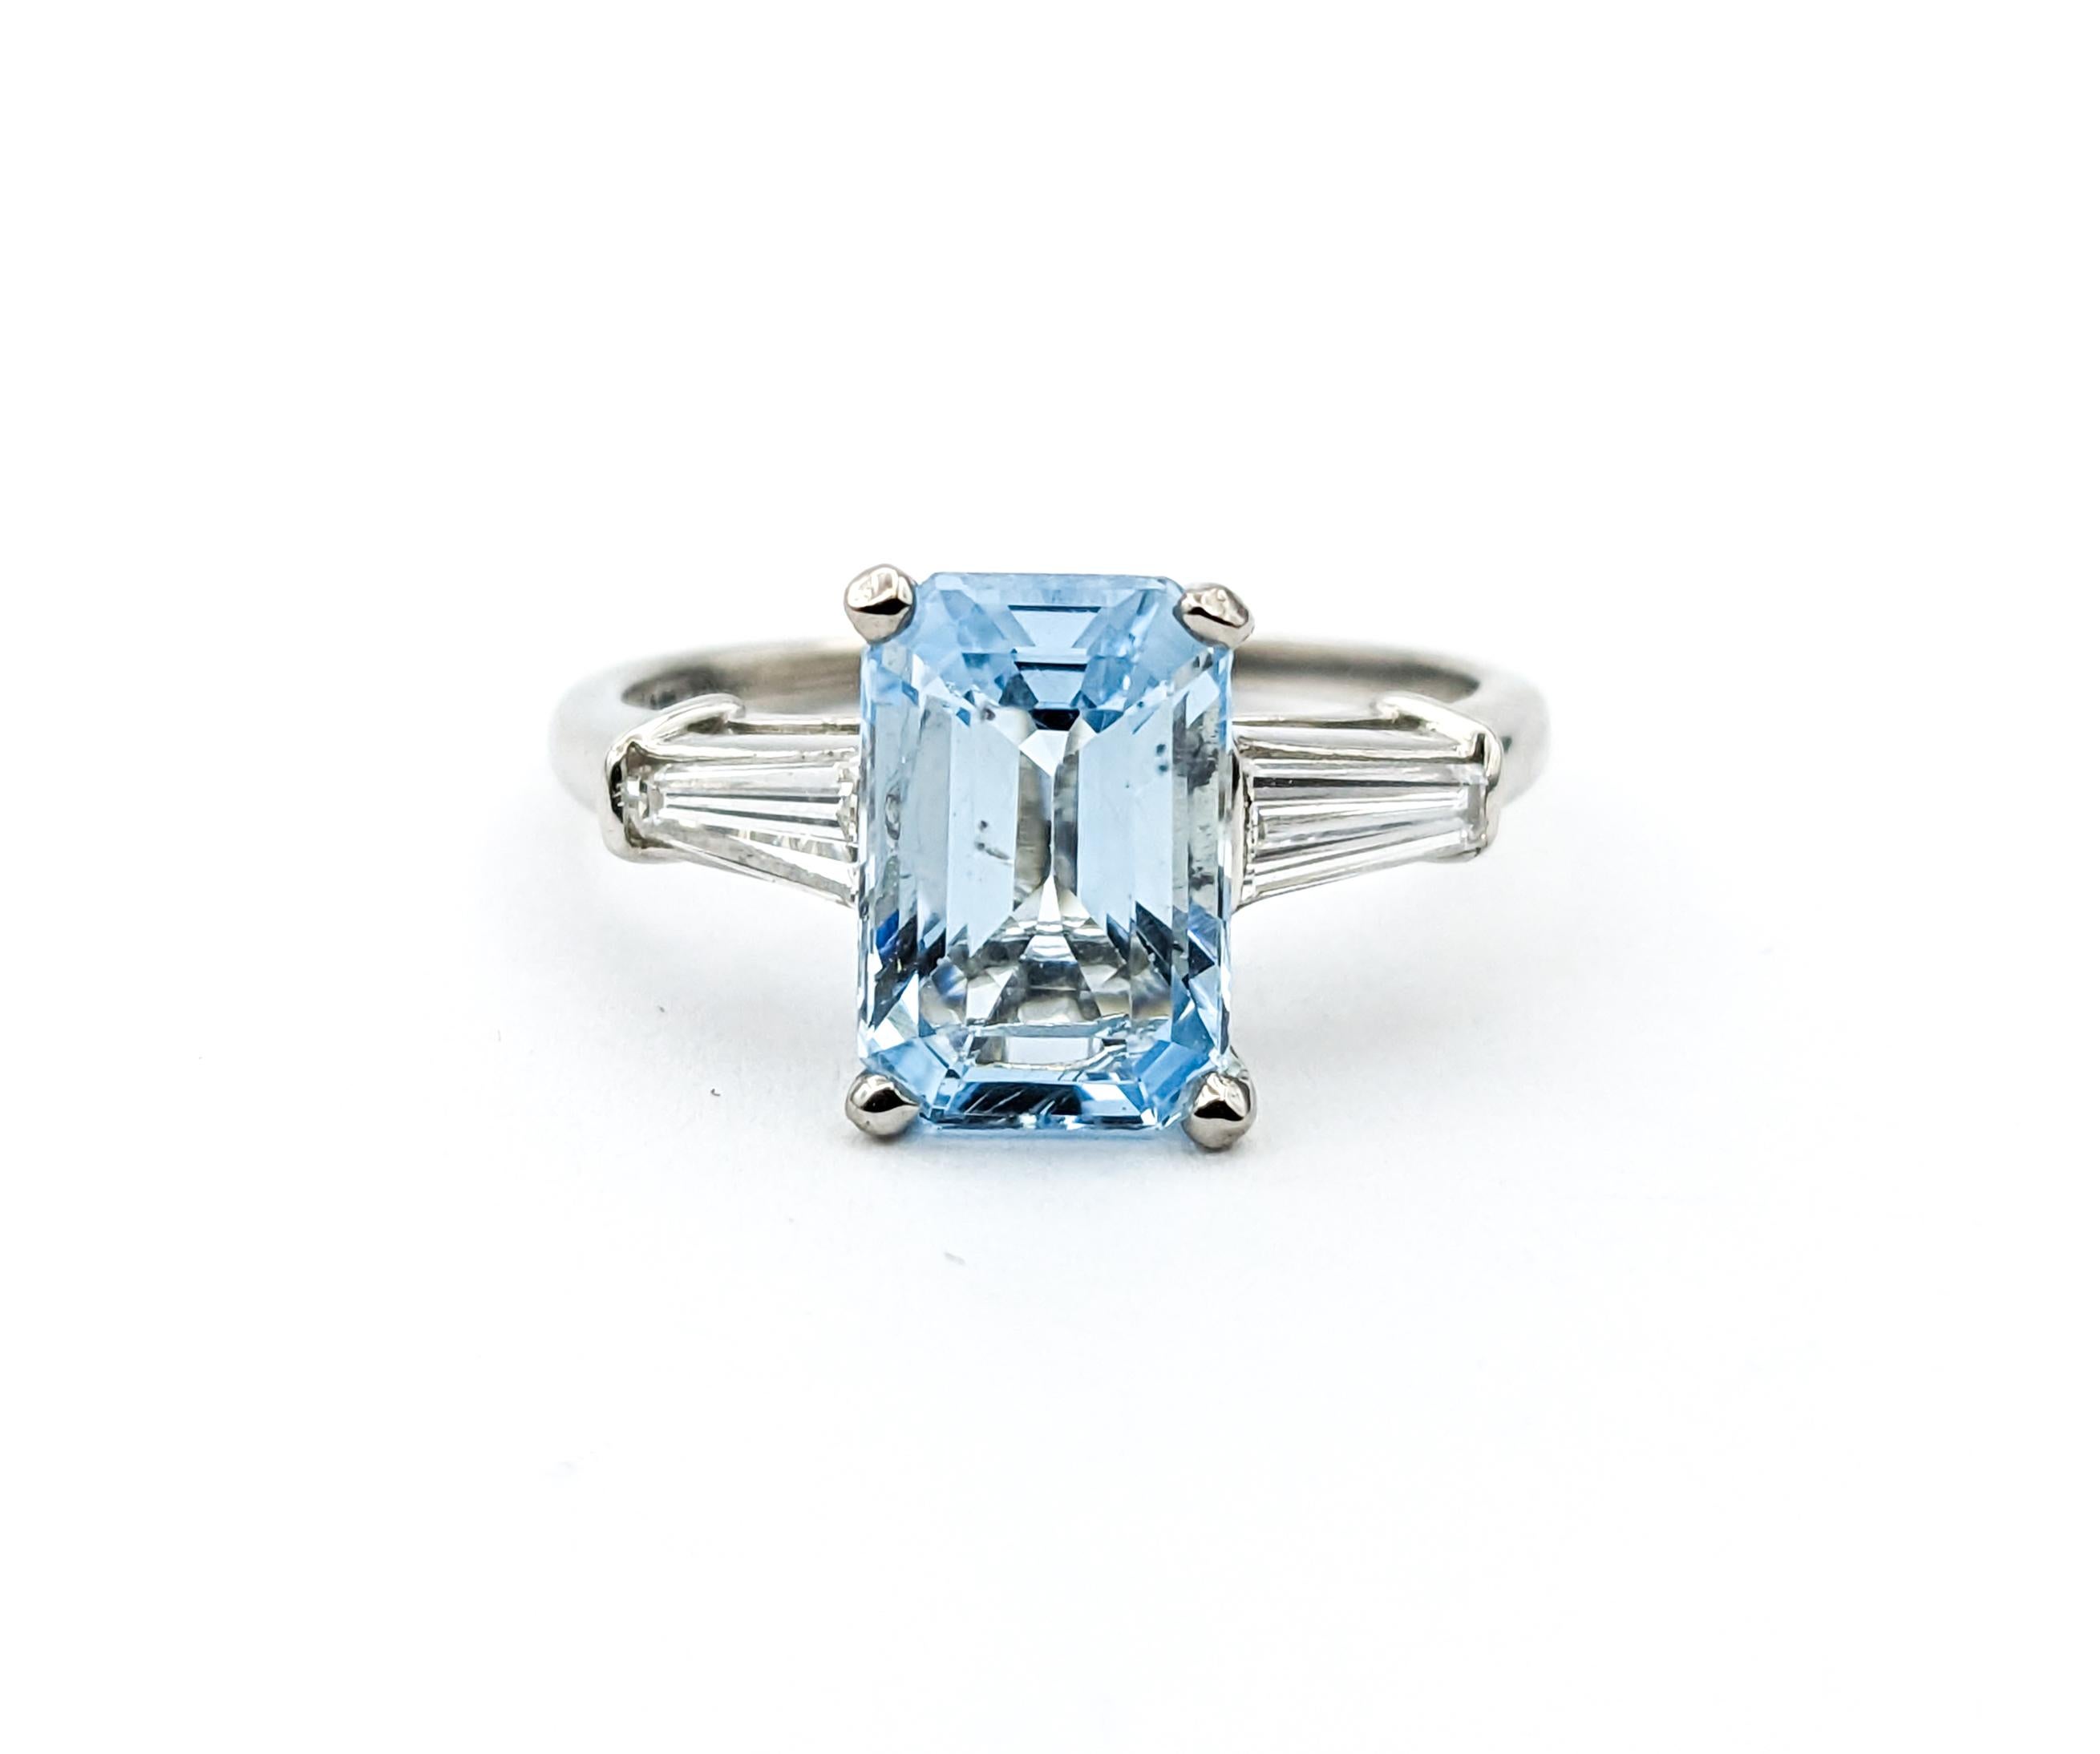 1.86ct Emerald Cut Aquamarine & Diamond Ring In Platinum

Explore the elegance of our stunning ring, finely crafted in 900 Platinum. The centerpiece features a captivating 1.86ct aquamarine in an Emerald Cut, adding a serene touch of color. The